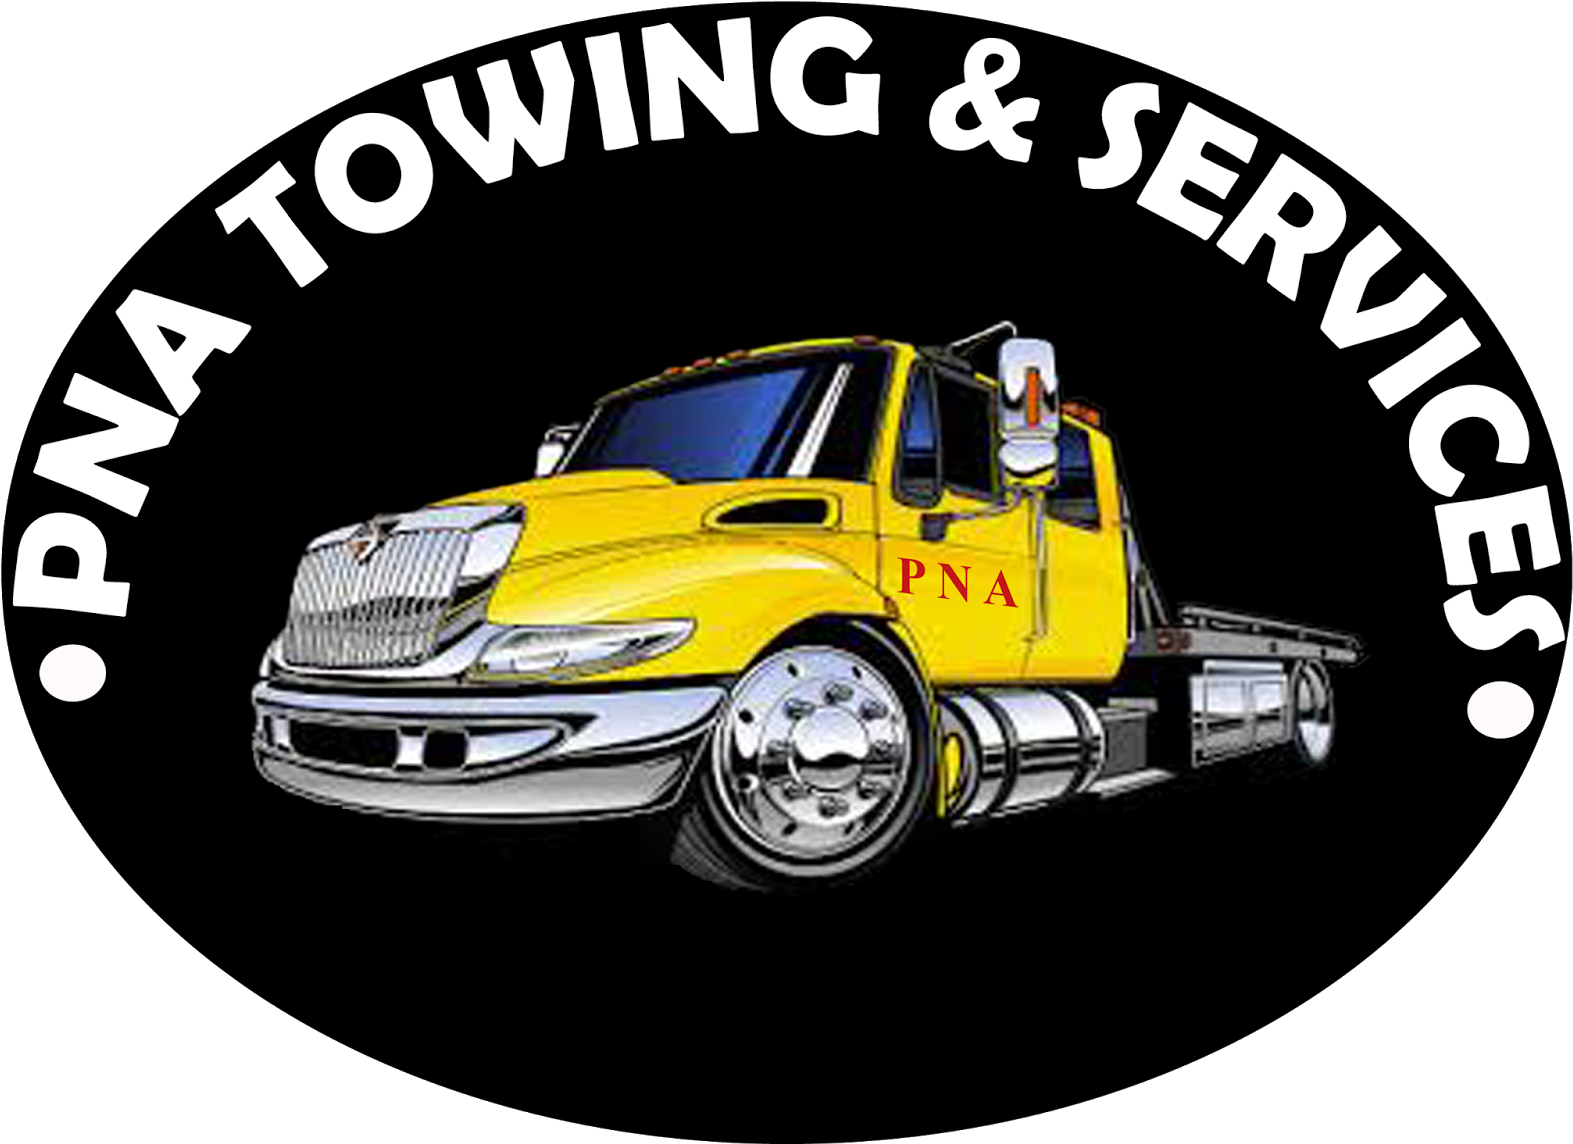 Pna Auto Enterprise Is A Tow Truck Company That Started - Truck (1600x1152)